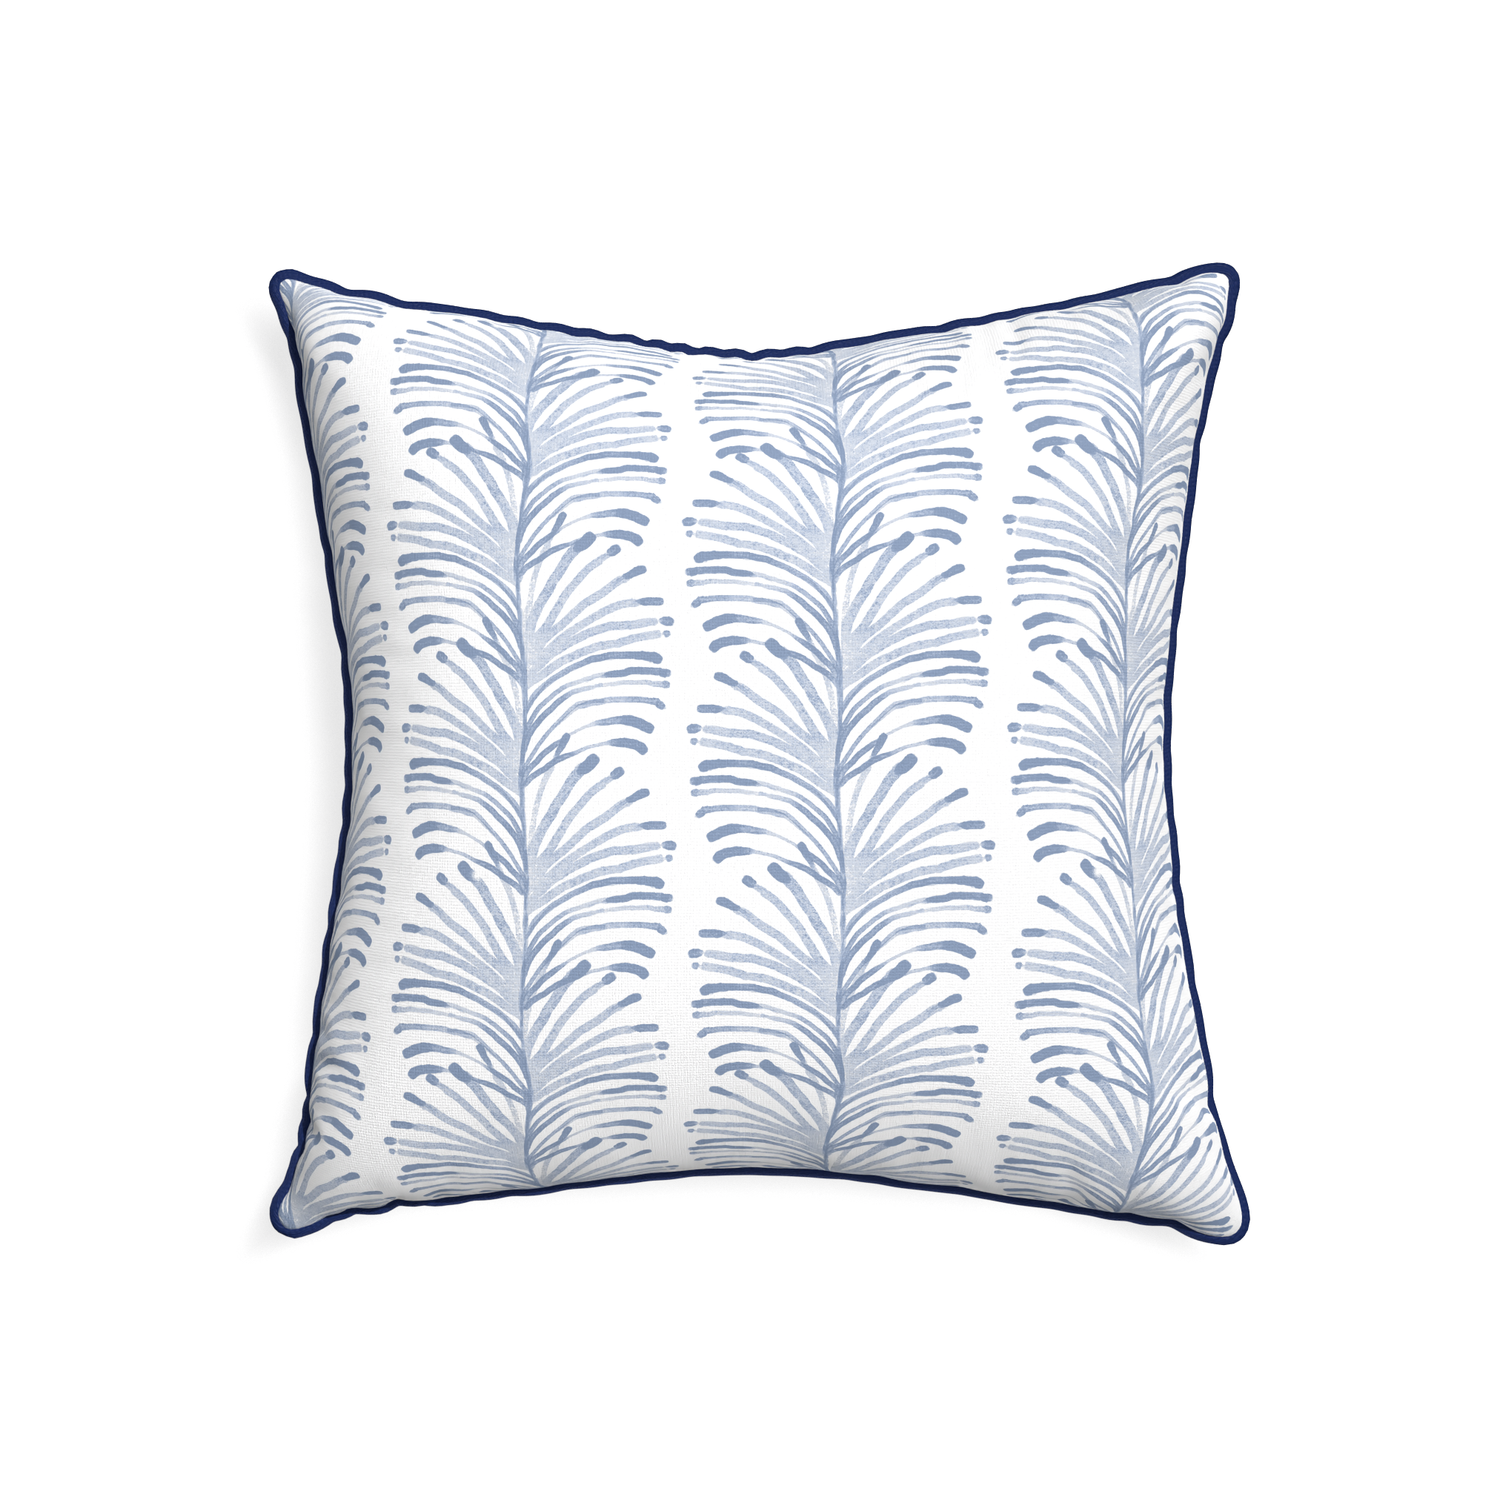 22-square emma sky custom sky blue botanical stripepillow with midnight piping on white background